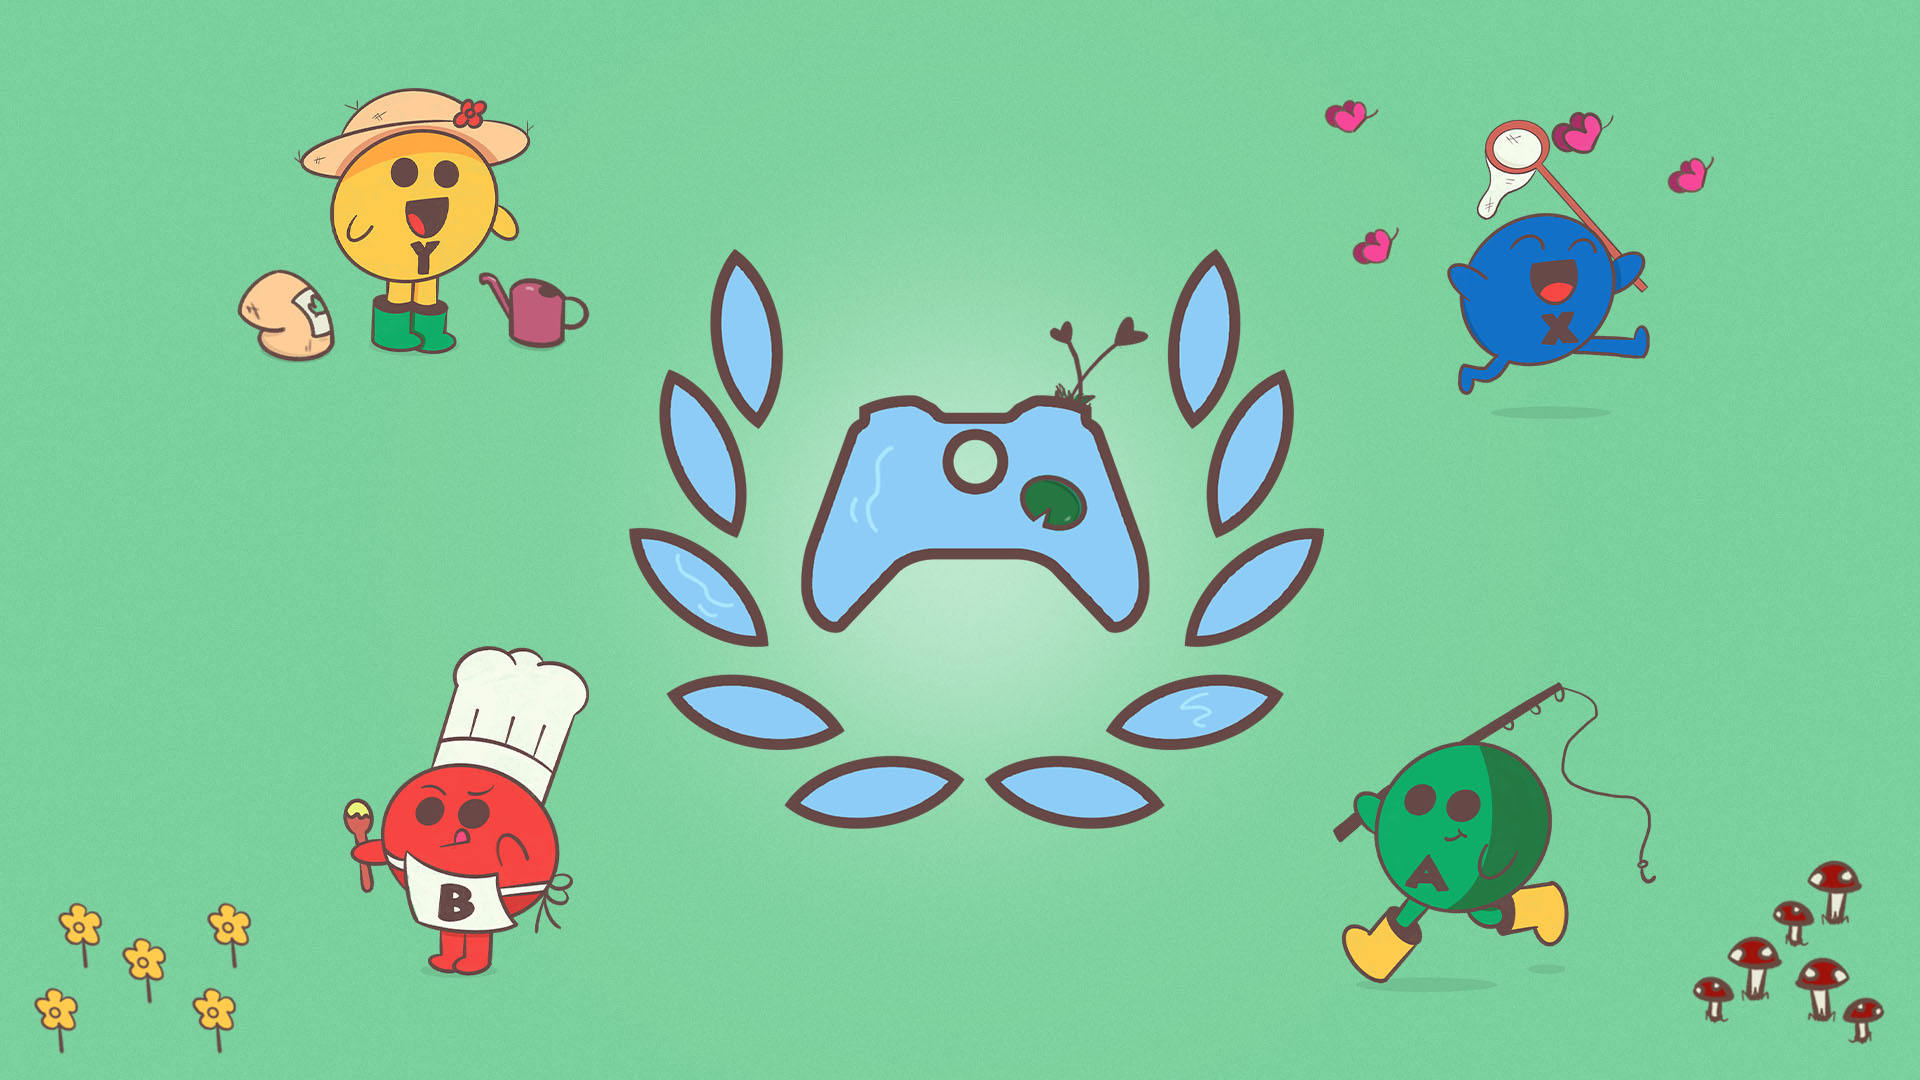 The Xbox Ambassadors controller and laurel leaf logo in a cartoon style with a blue pond background and a green lily pad surrounded by four button characters. The red “B” button is wearing a white chef hat and holding a wooden spoon, the yellow Y button has a bag of soil and a watering can, the blue “X” button is chasing pink butterflies with a net, and the green “A” button is holding a fishing pole.